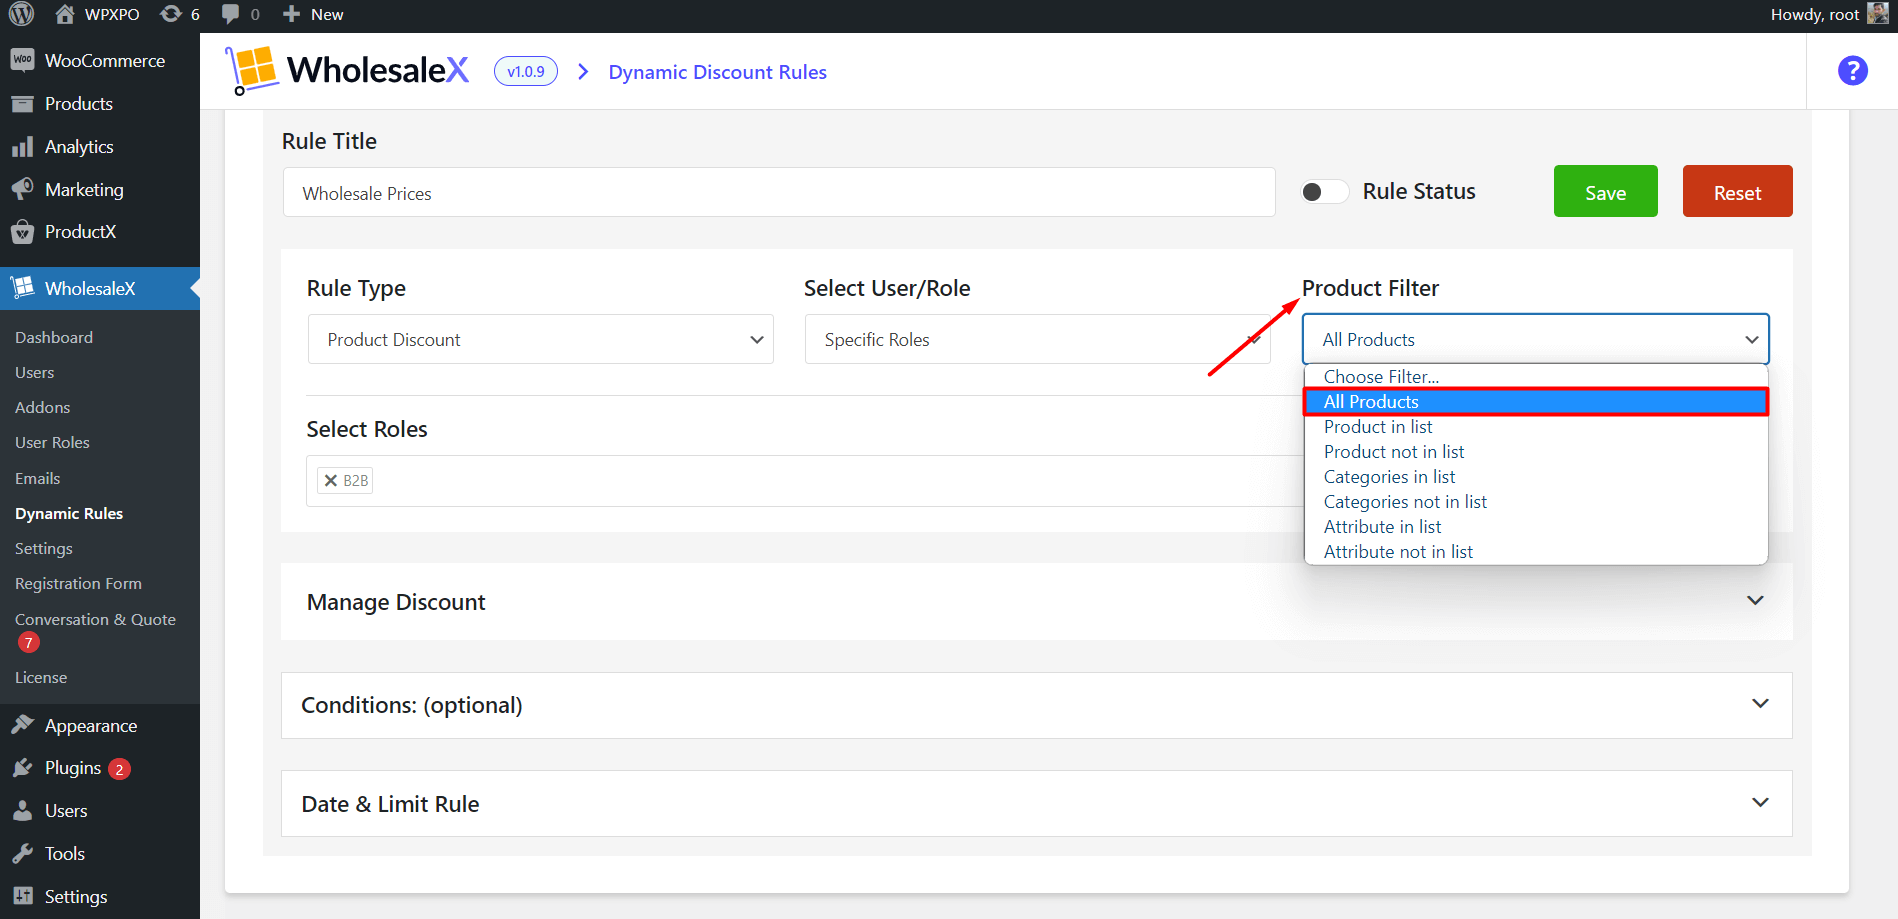 Working with the Product Filter